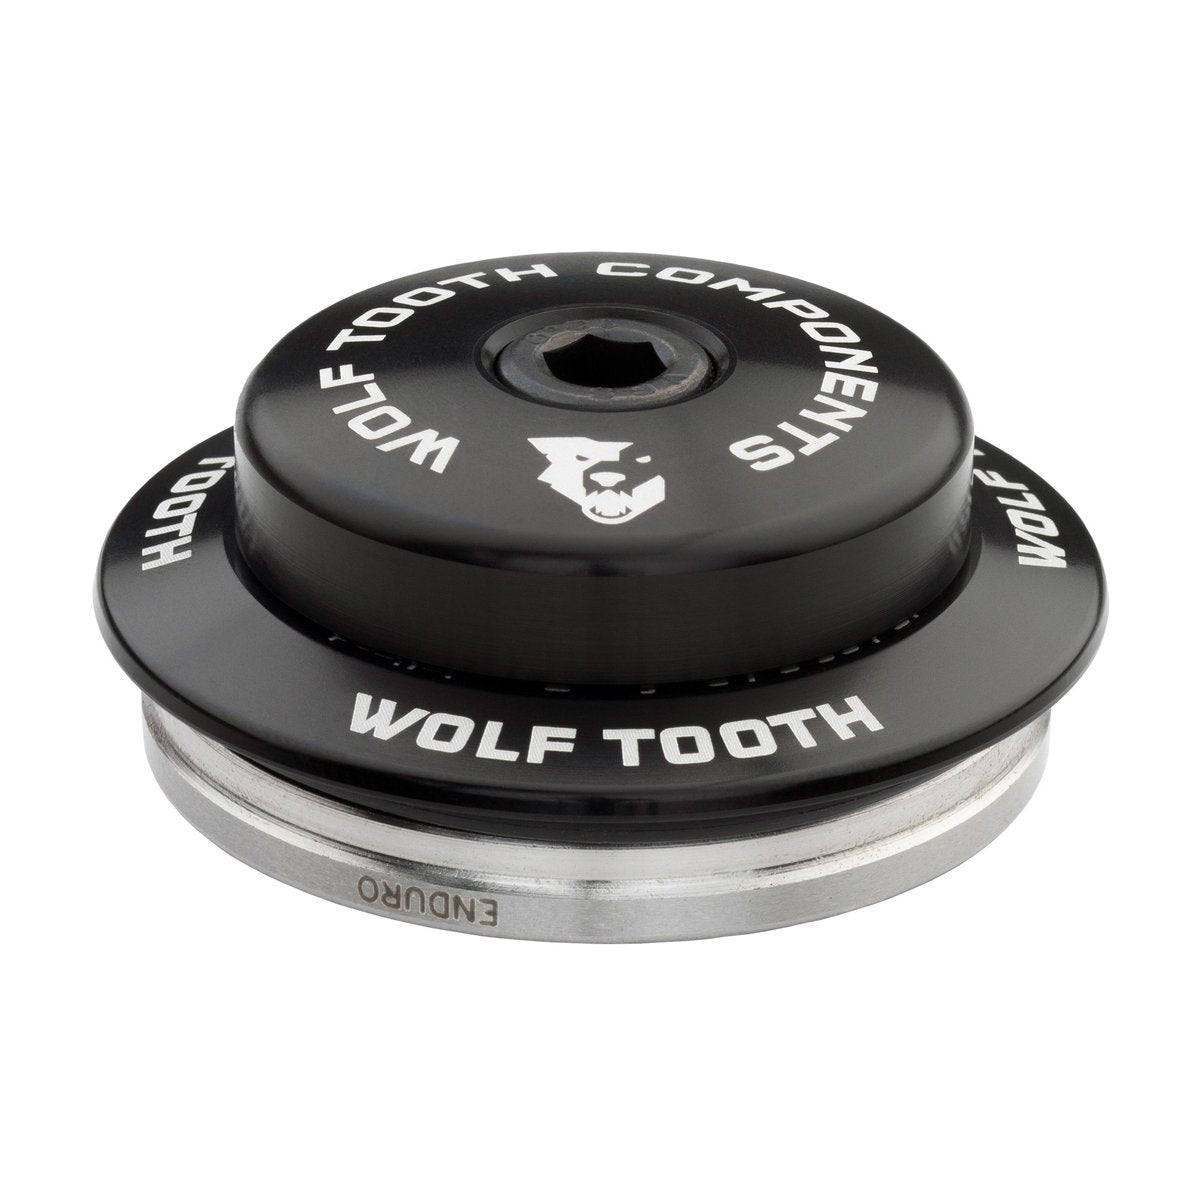 SALE／80%OFF】 Wolf Tooth Premium IS42 Headsets Integrated Standard